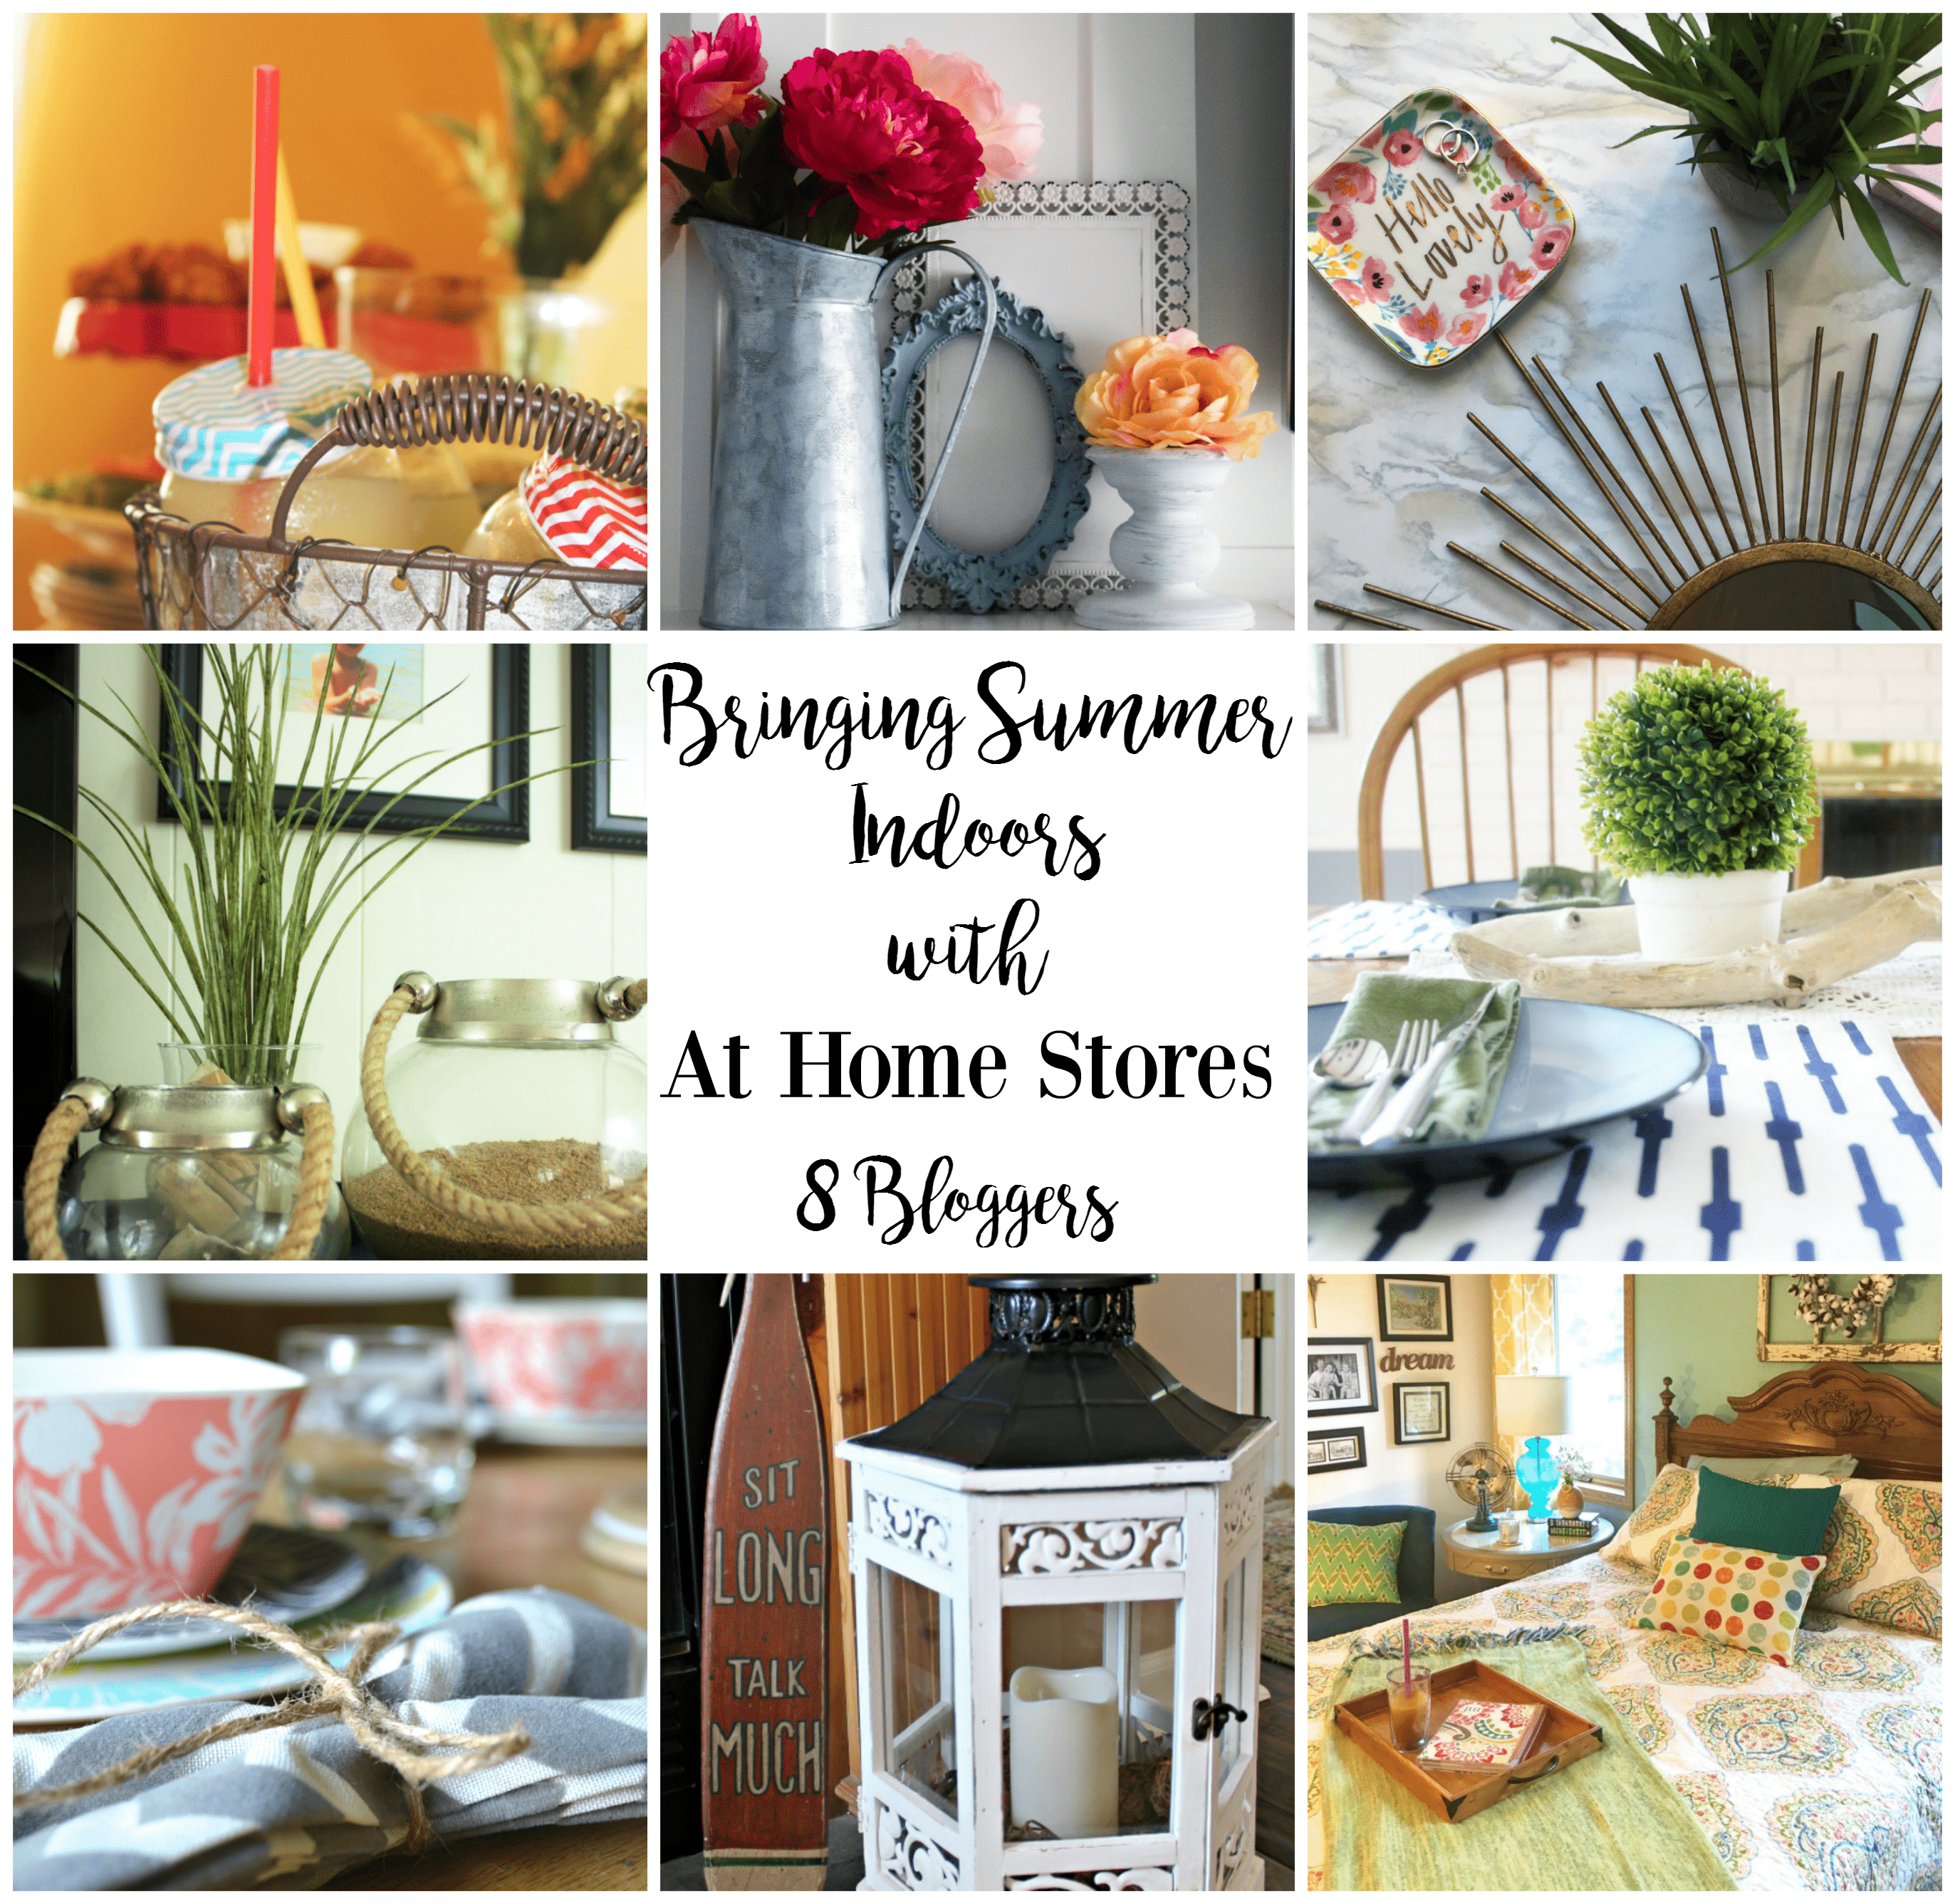 Bringing Summer Indoors with At Home Stores